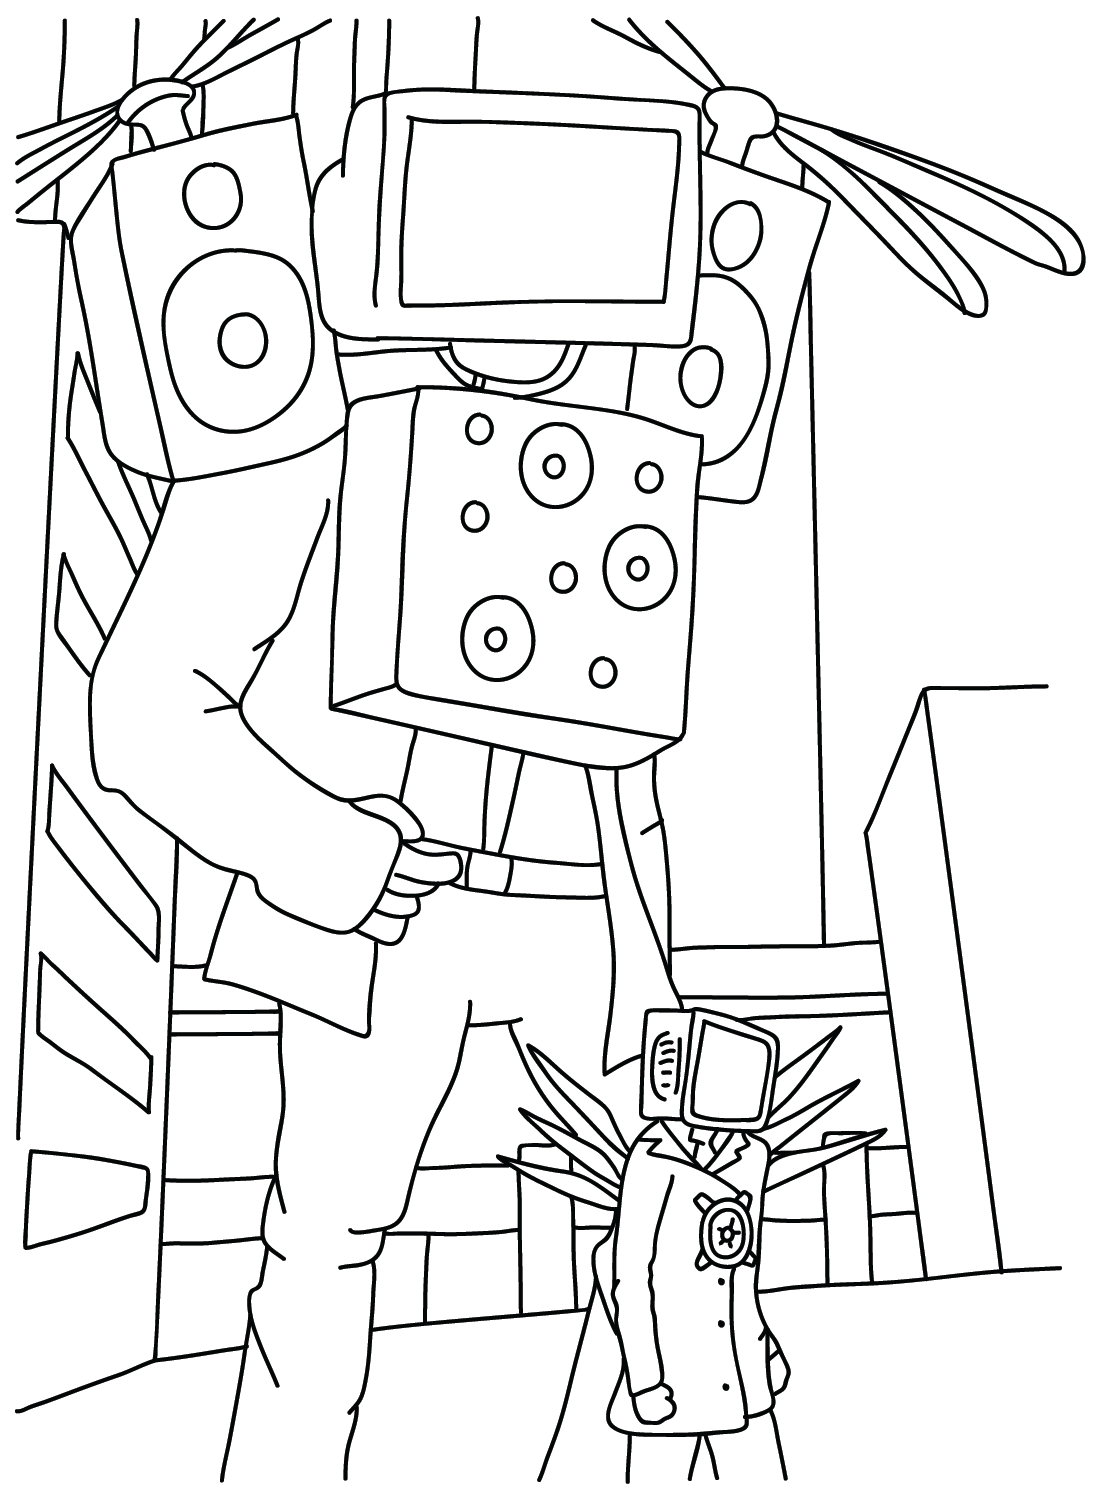 Titan TV Man Coloring Pages to Printable from Titan TV Man